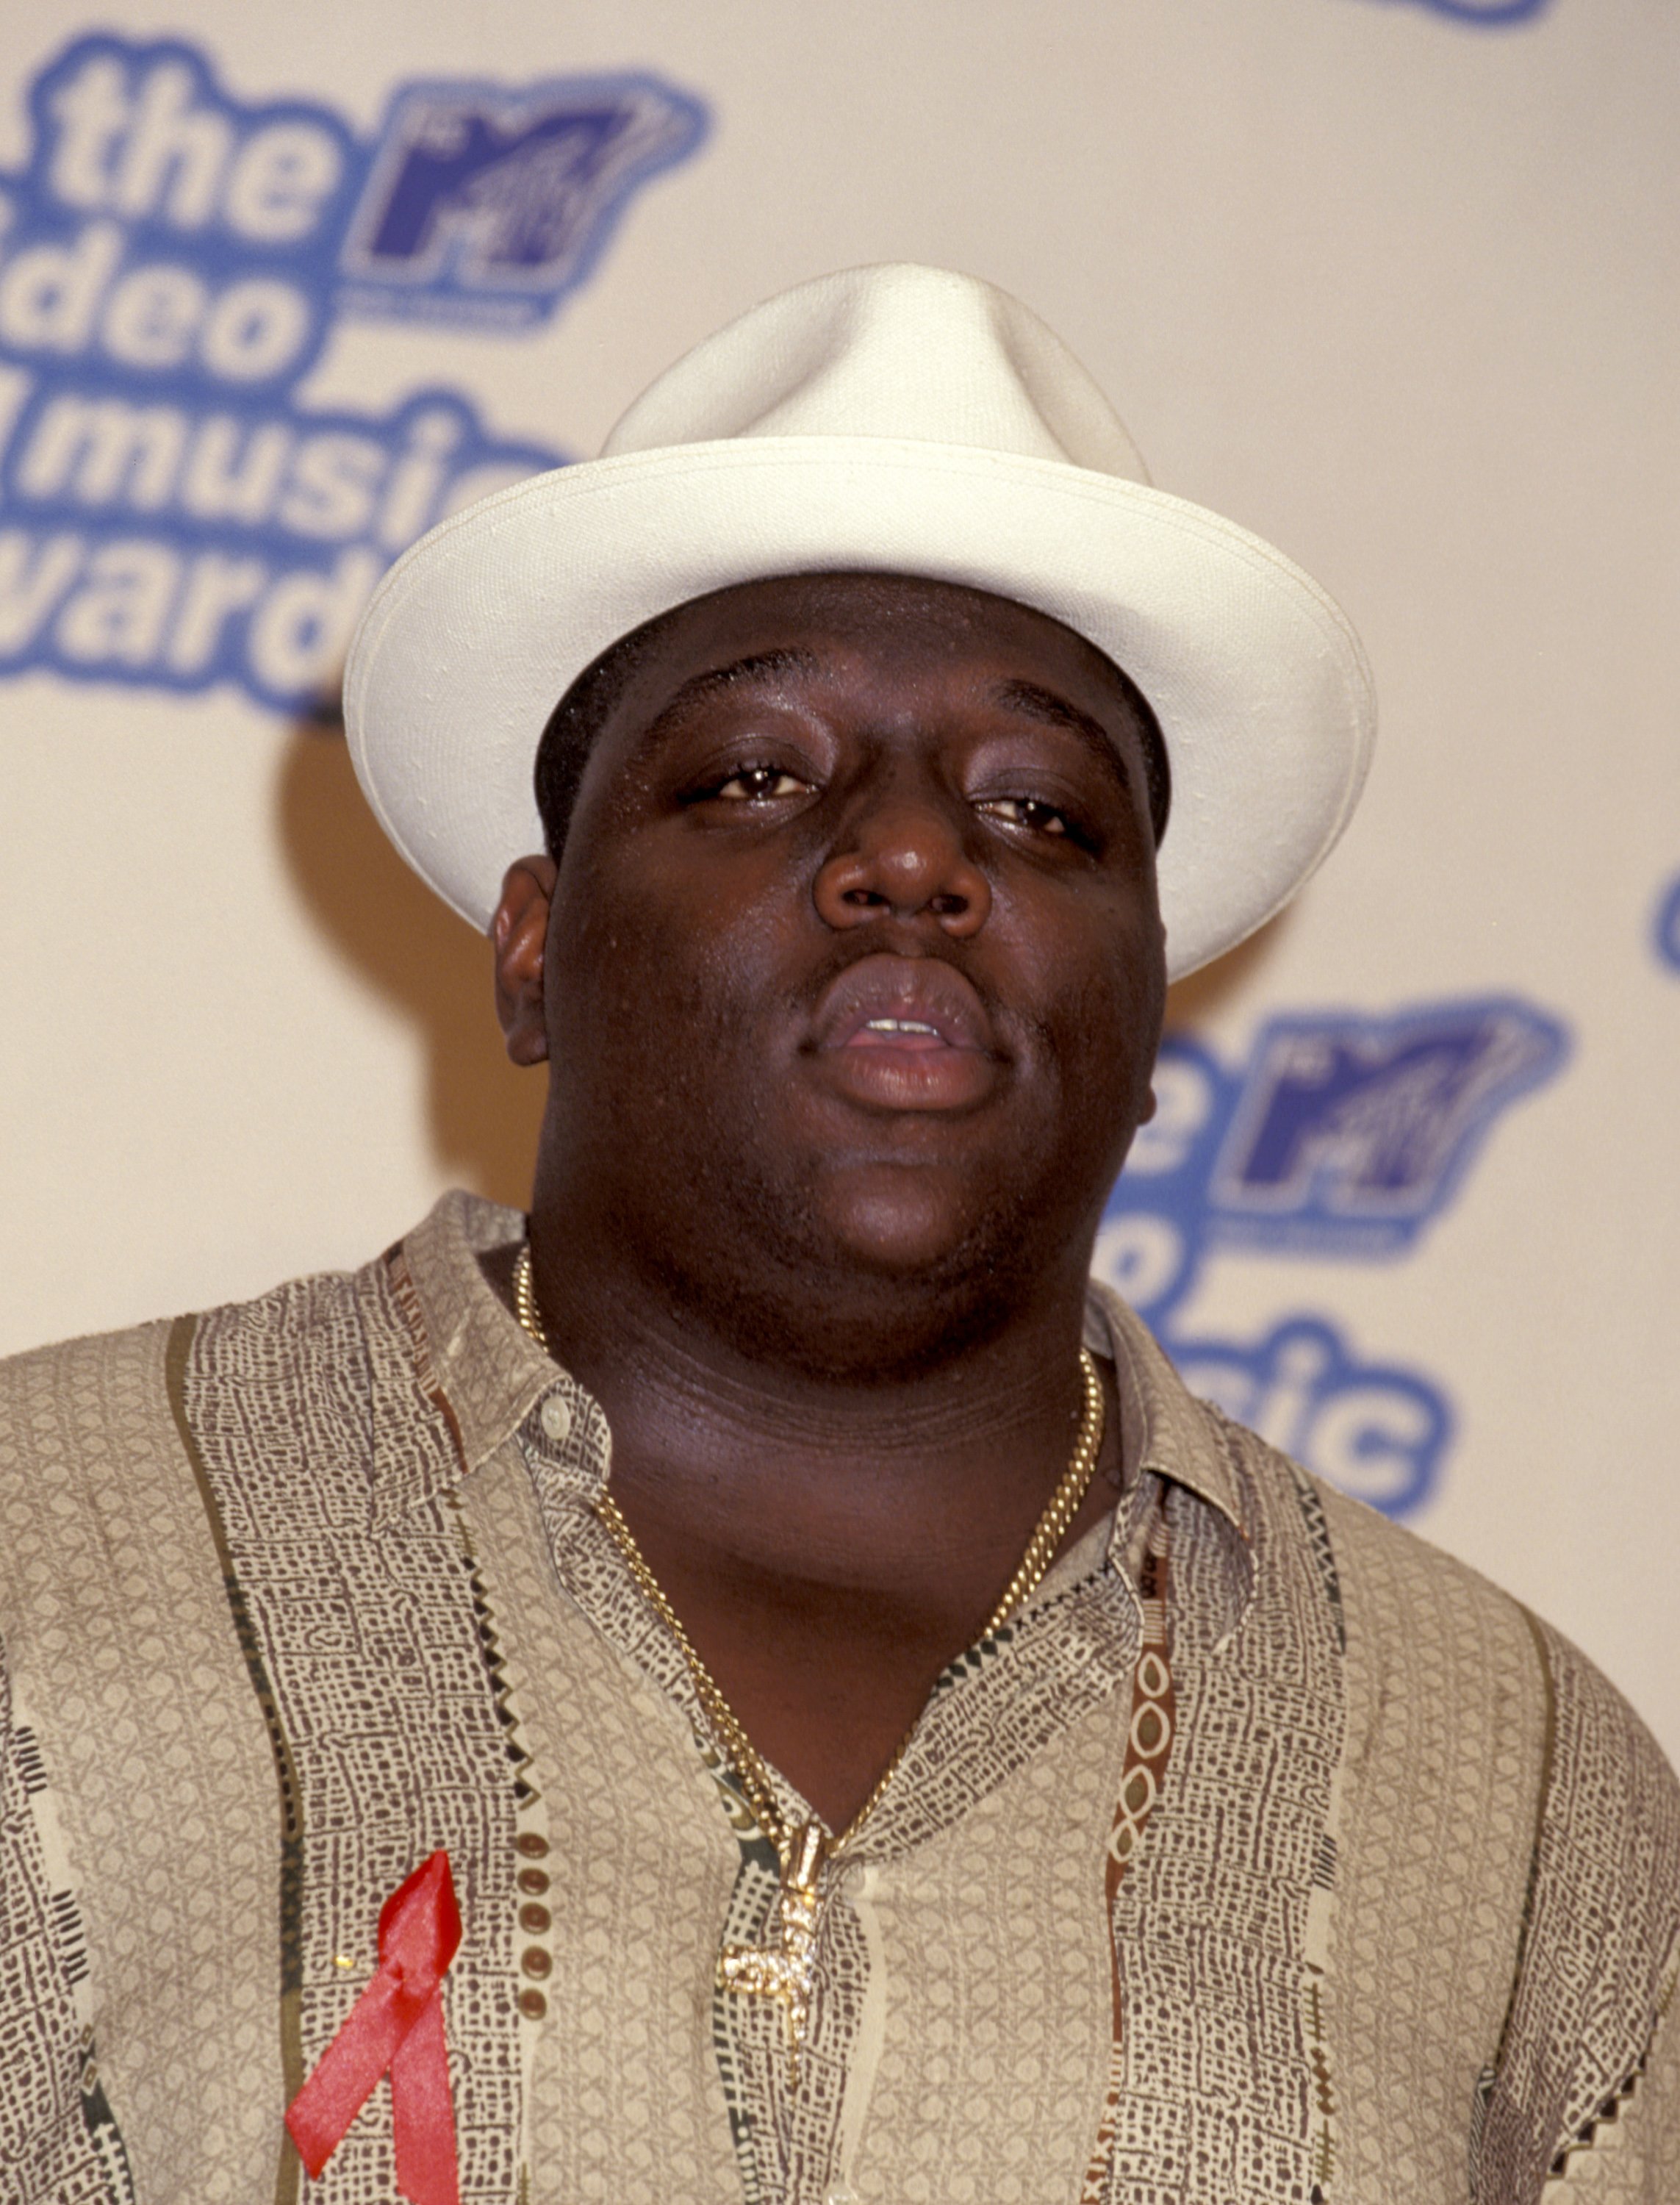 The Notorious B.I.G. at the Wetlands in New York City, 1995 | Source: Getty Images